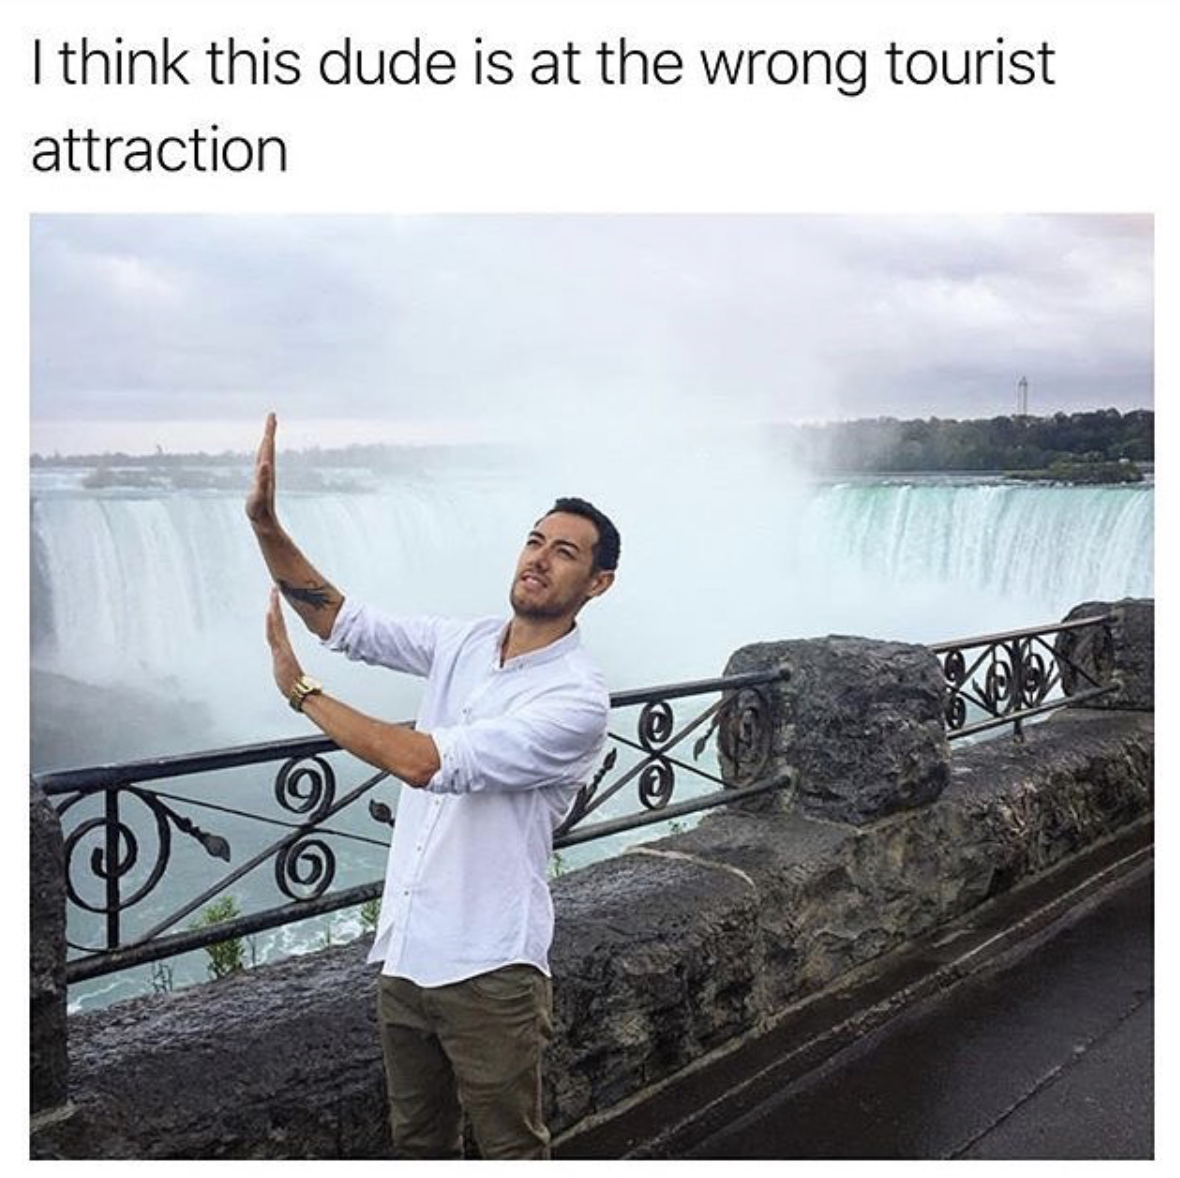 niagara falls - I think this dude is at the wrong tourist attraction